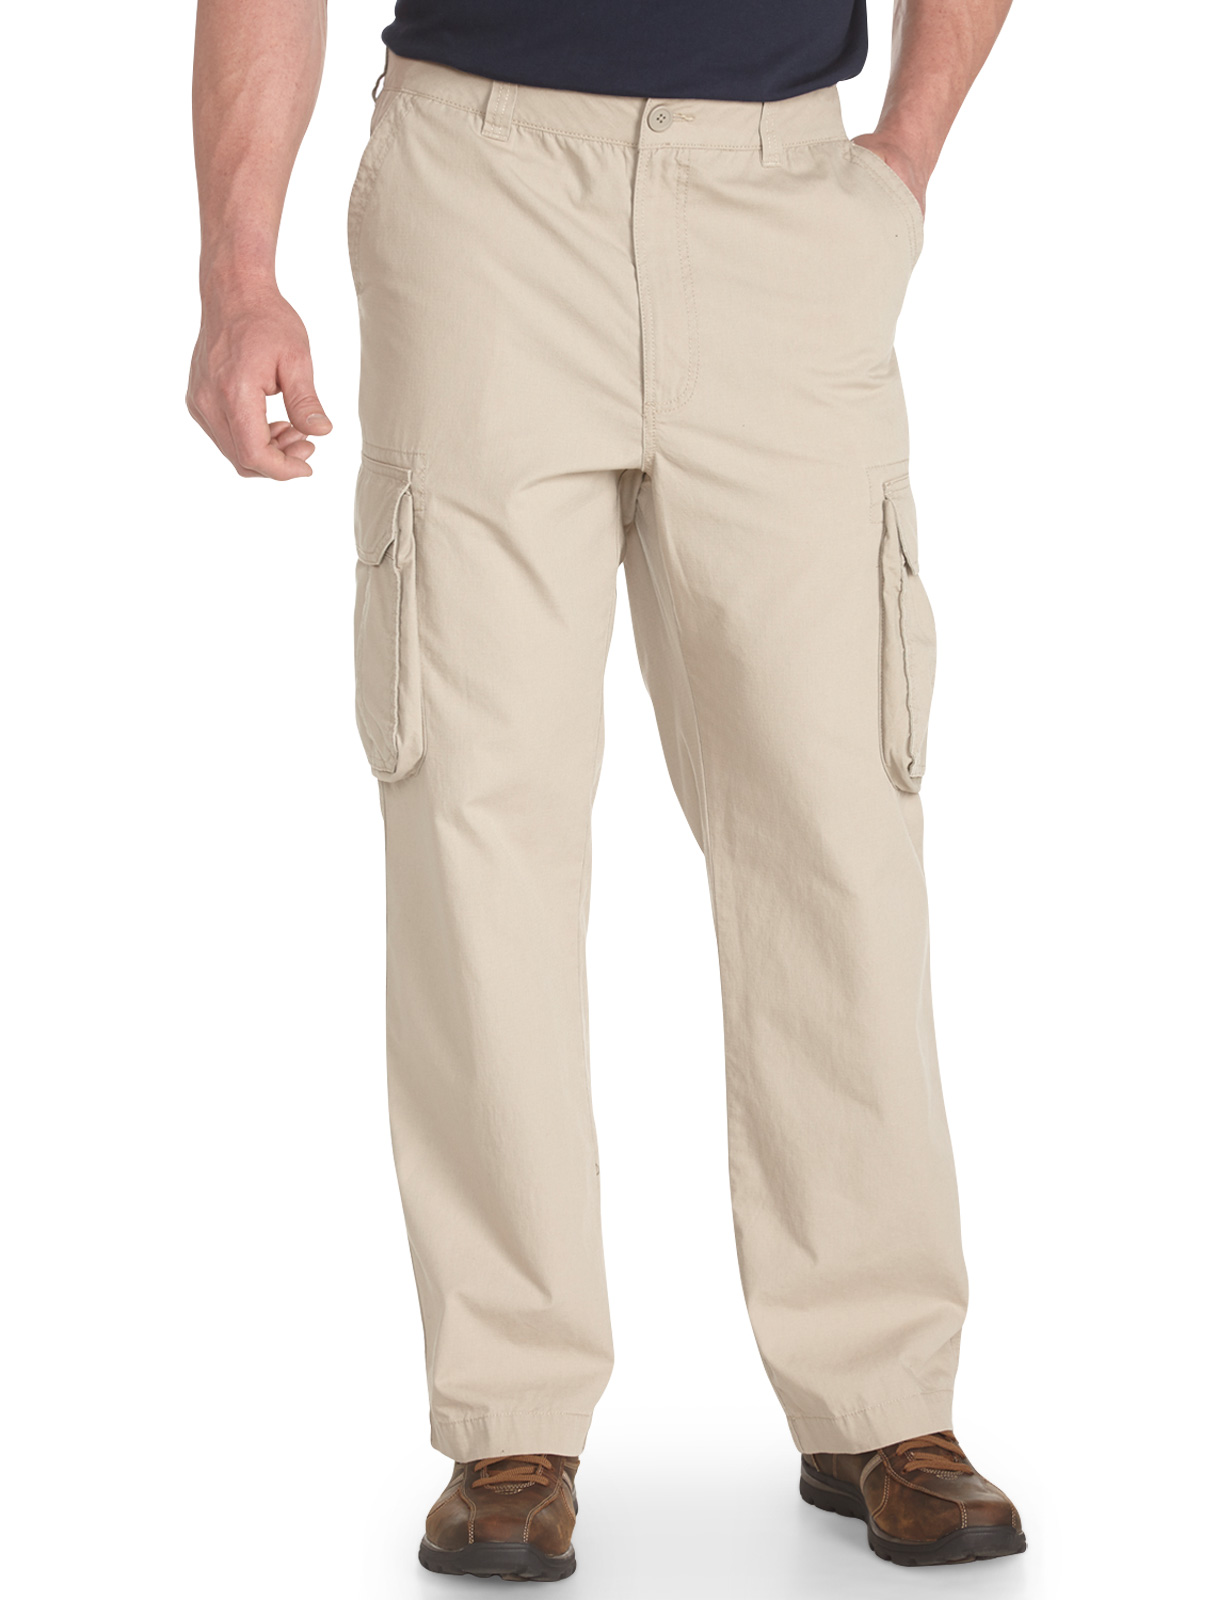 True Nation Men's Big and Tall Continuous Comfort Ripstop Cargo Pants